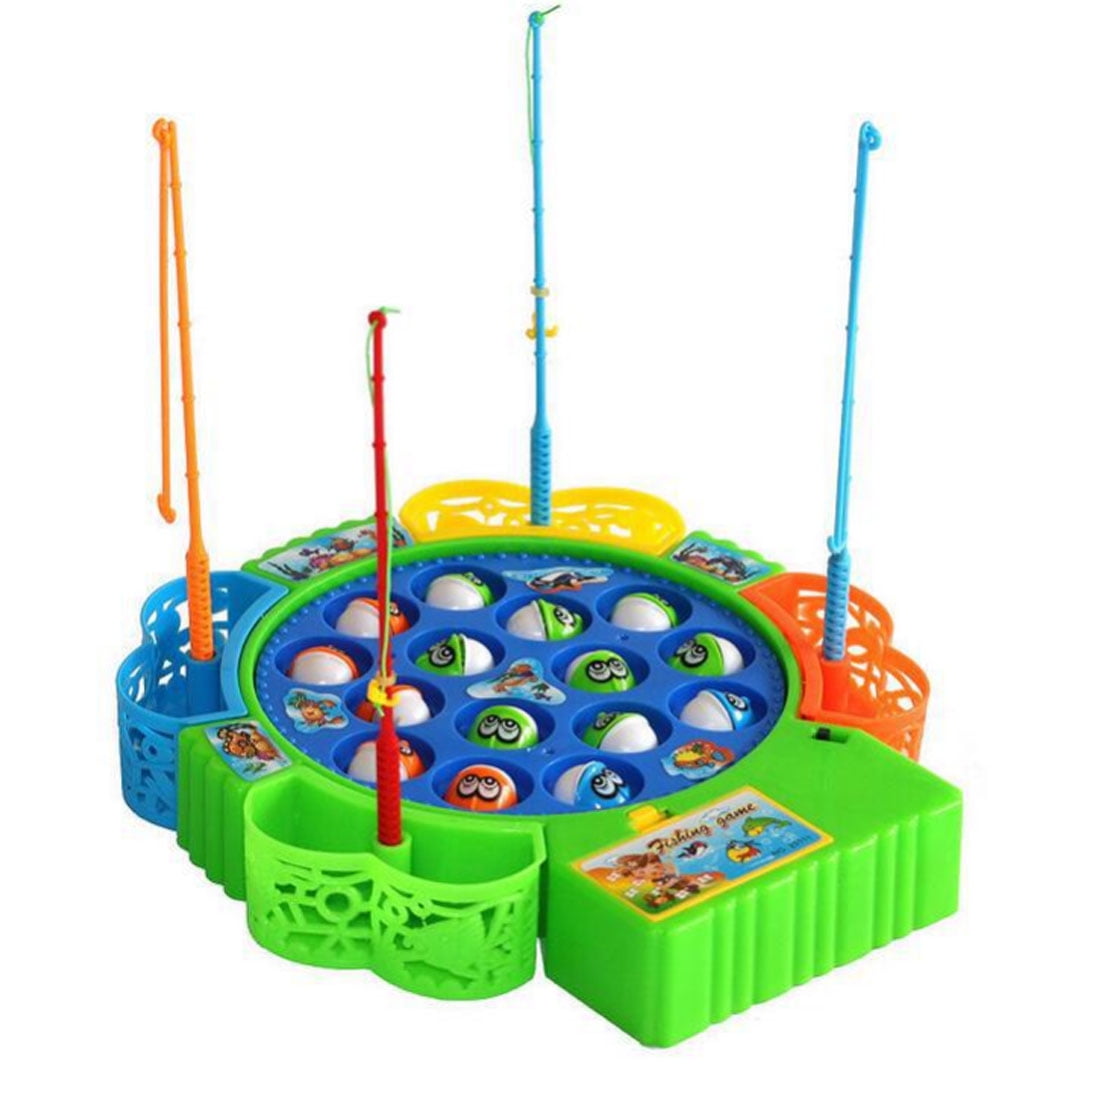 Fishing game set with fishing rods and fishes – SELLET